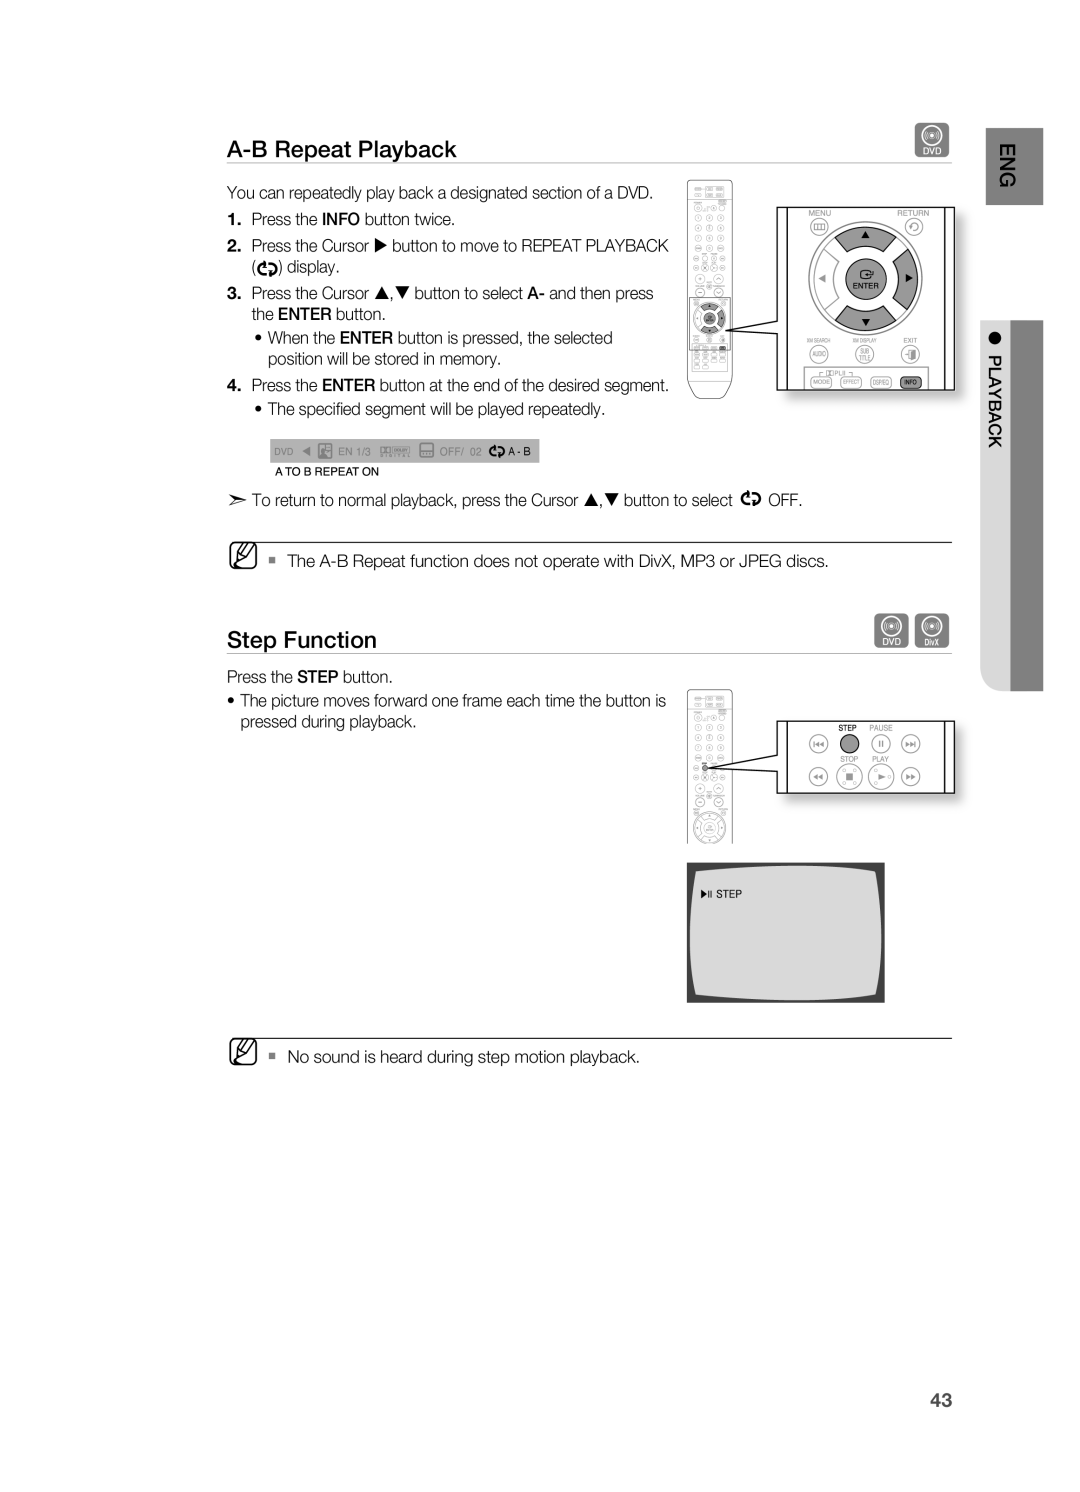 Samsung HT-Z510 manual A-Brepeat Playback, Step Function 